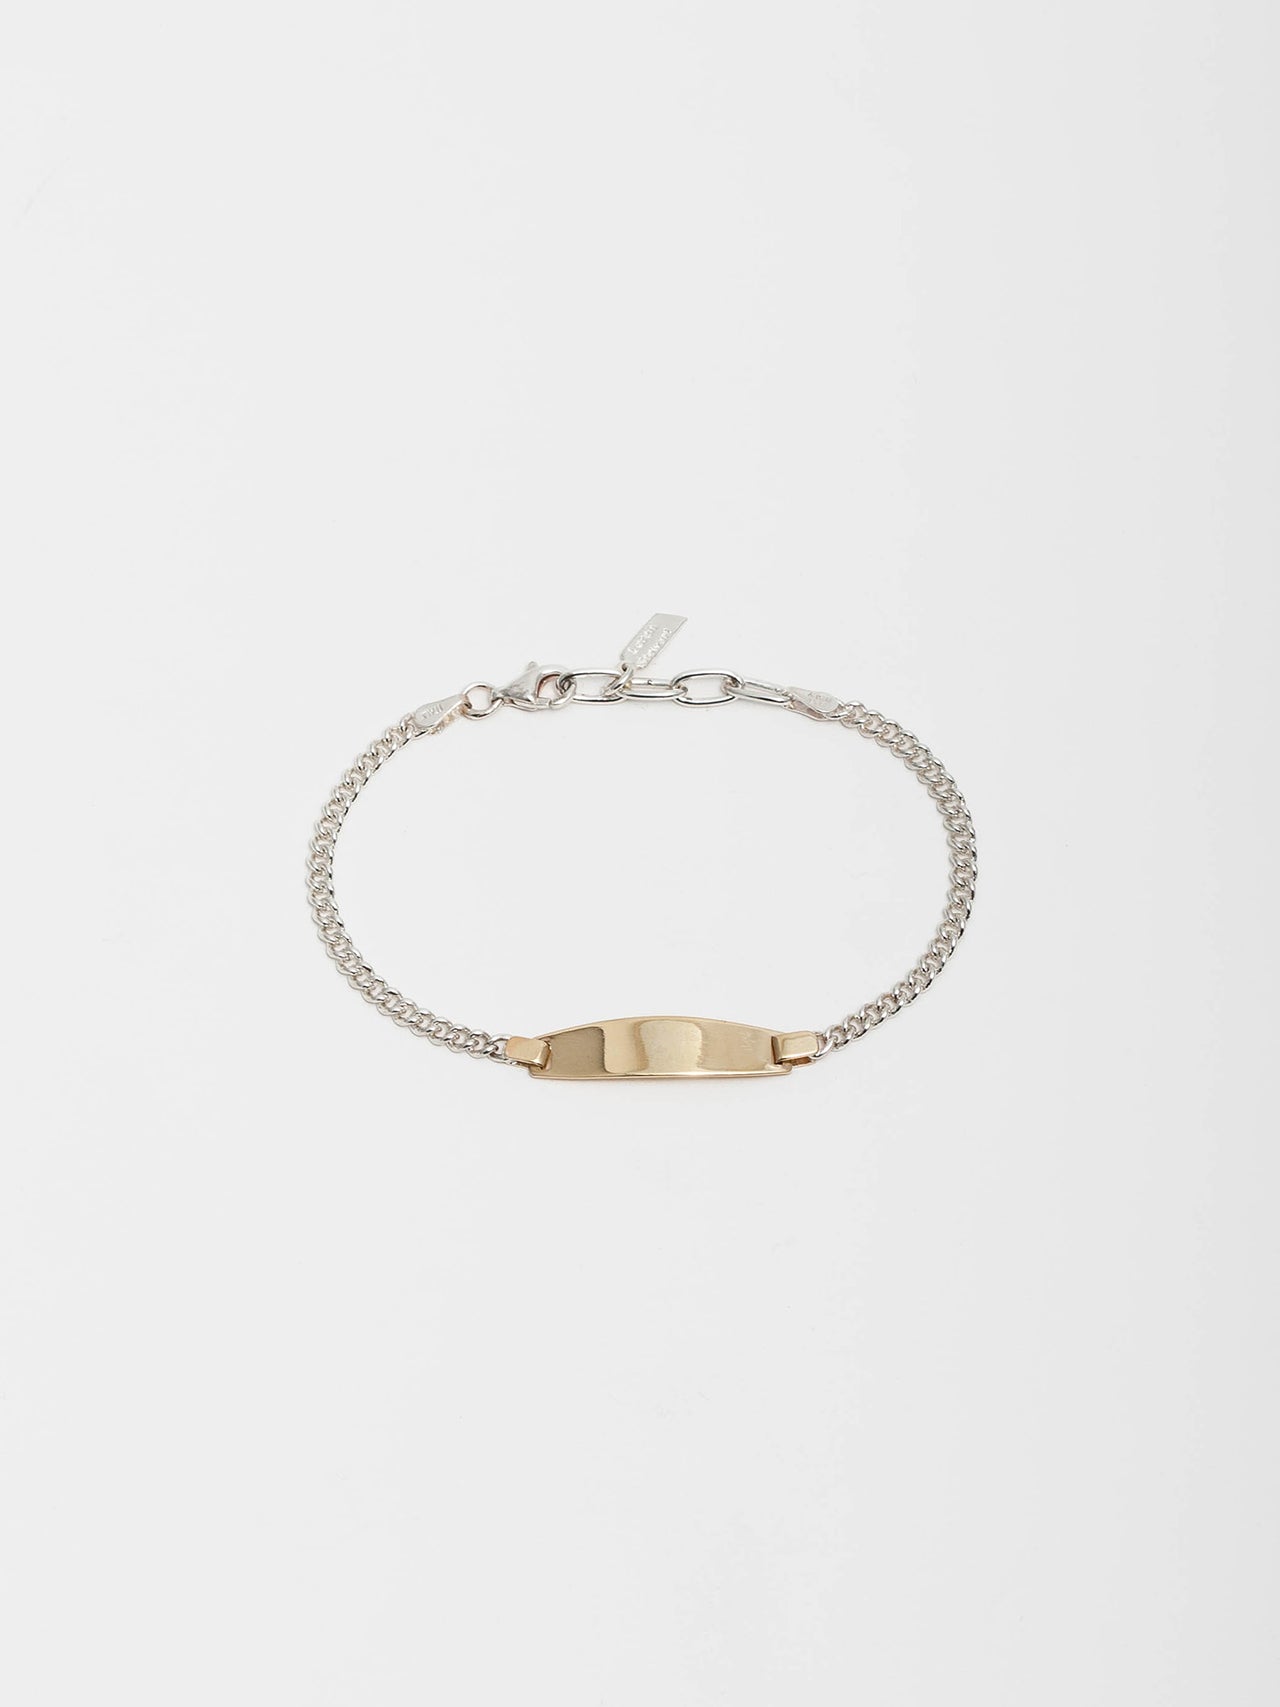 Mini Ellipse Bracelet pictured on light grey background. Sterling Silver Curb Chain with 14kt Yellow Gold Oval ID.